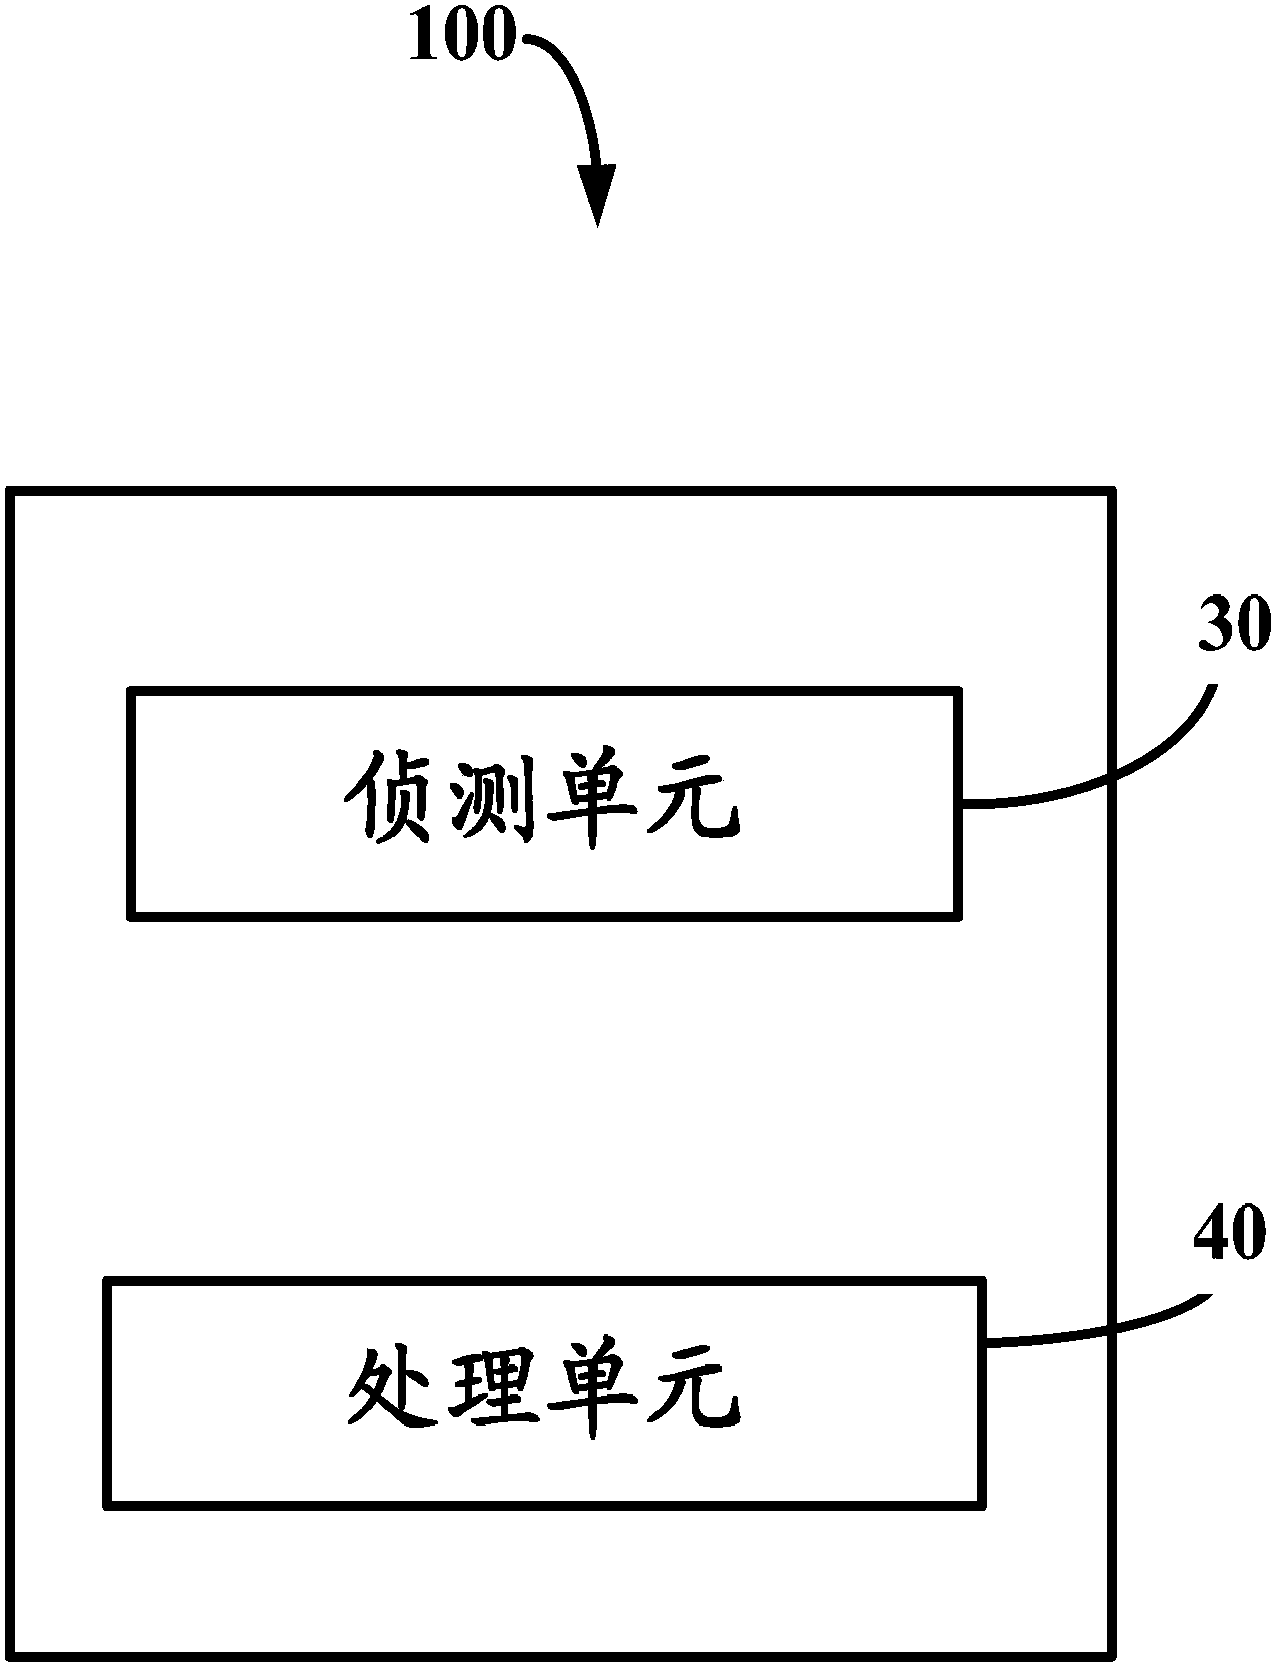 Electronic device with mirror function